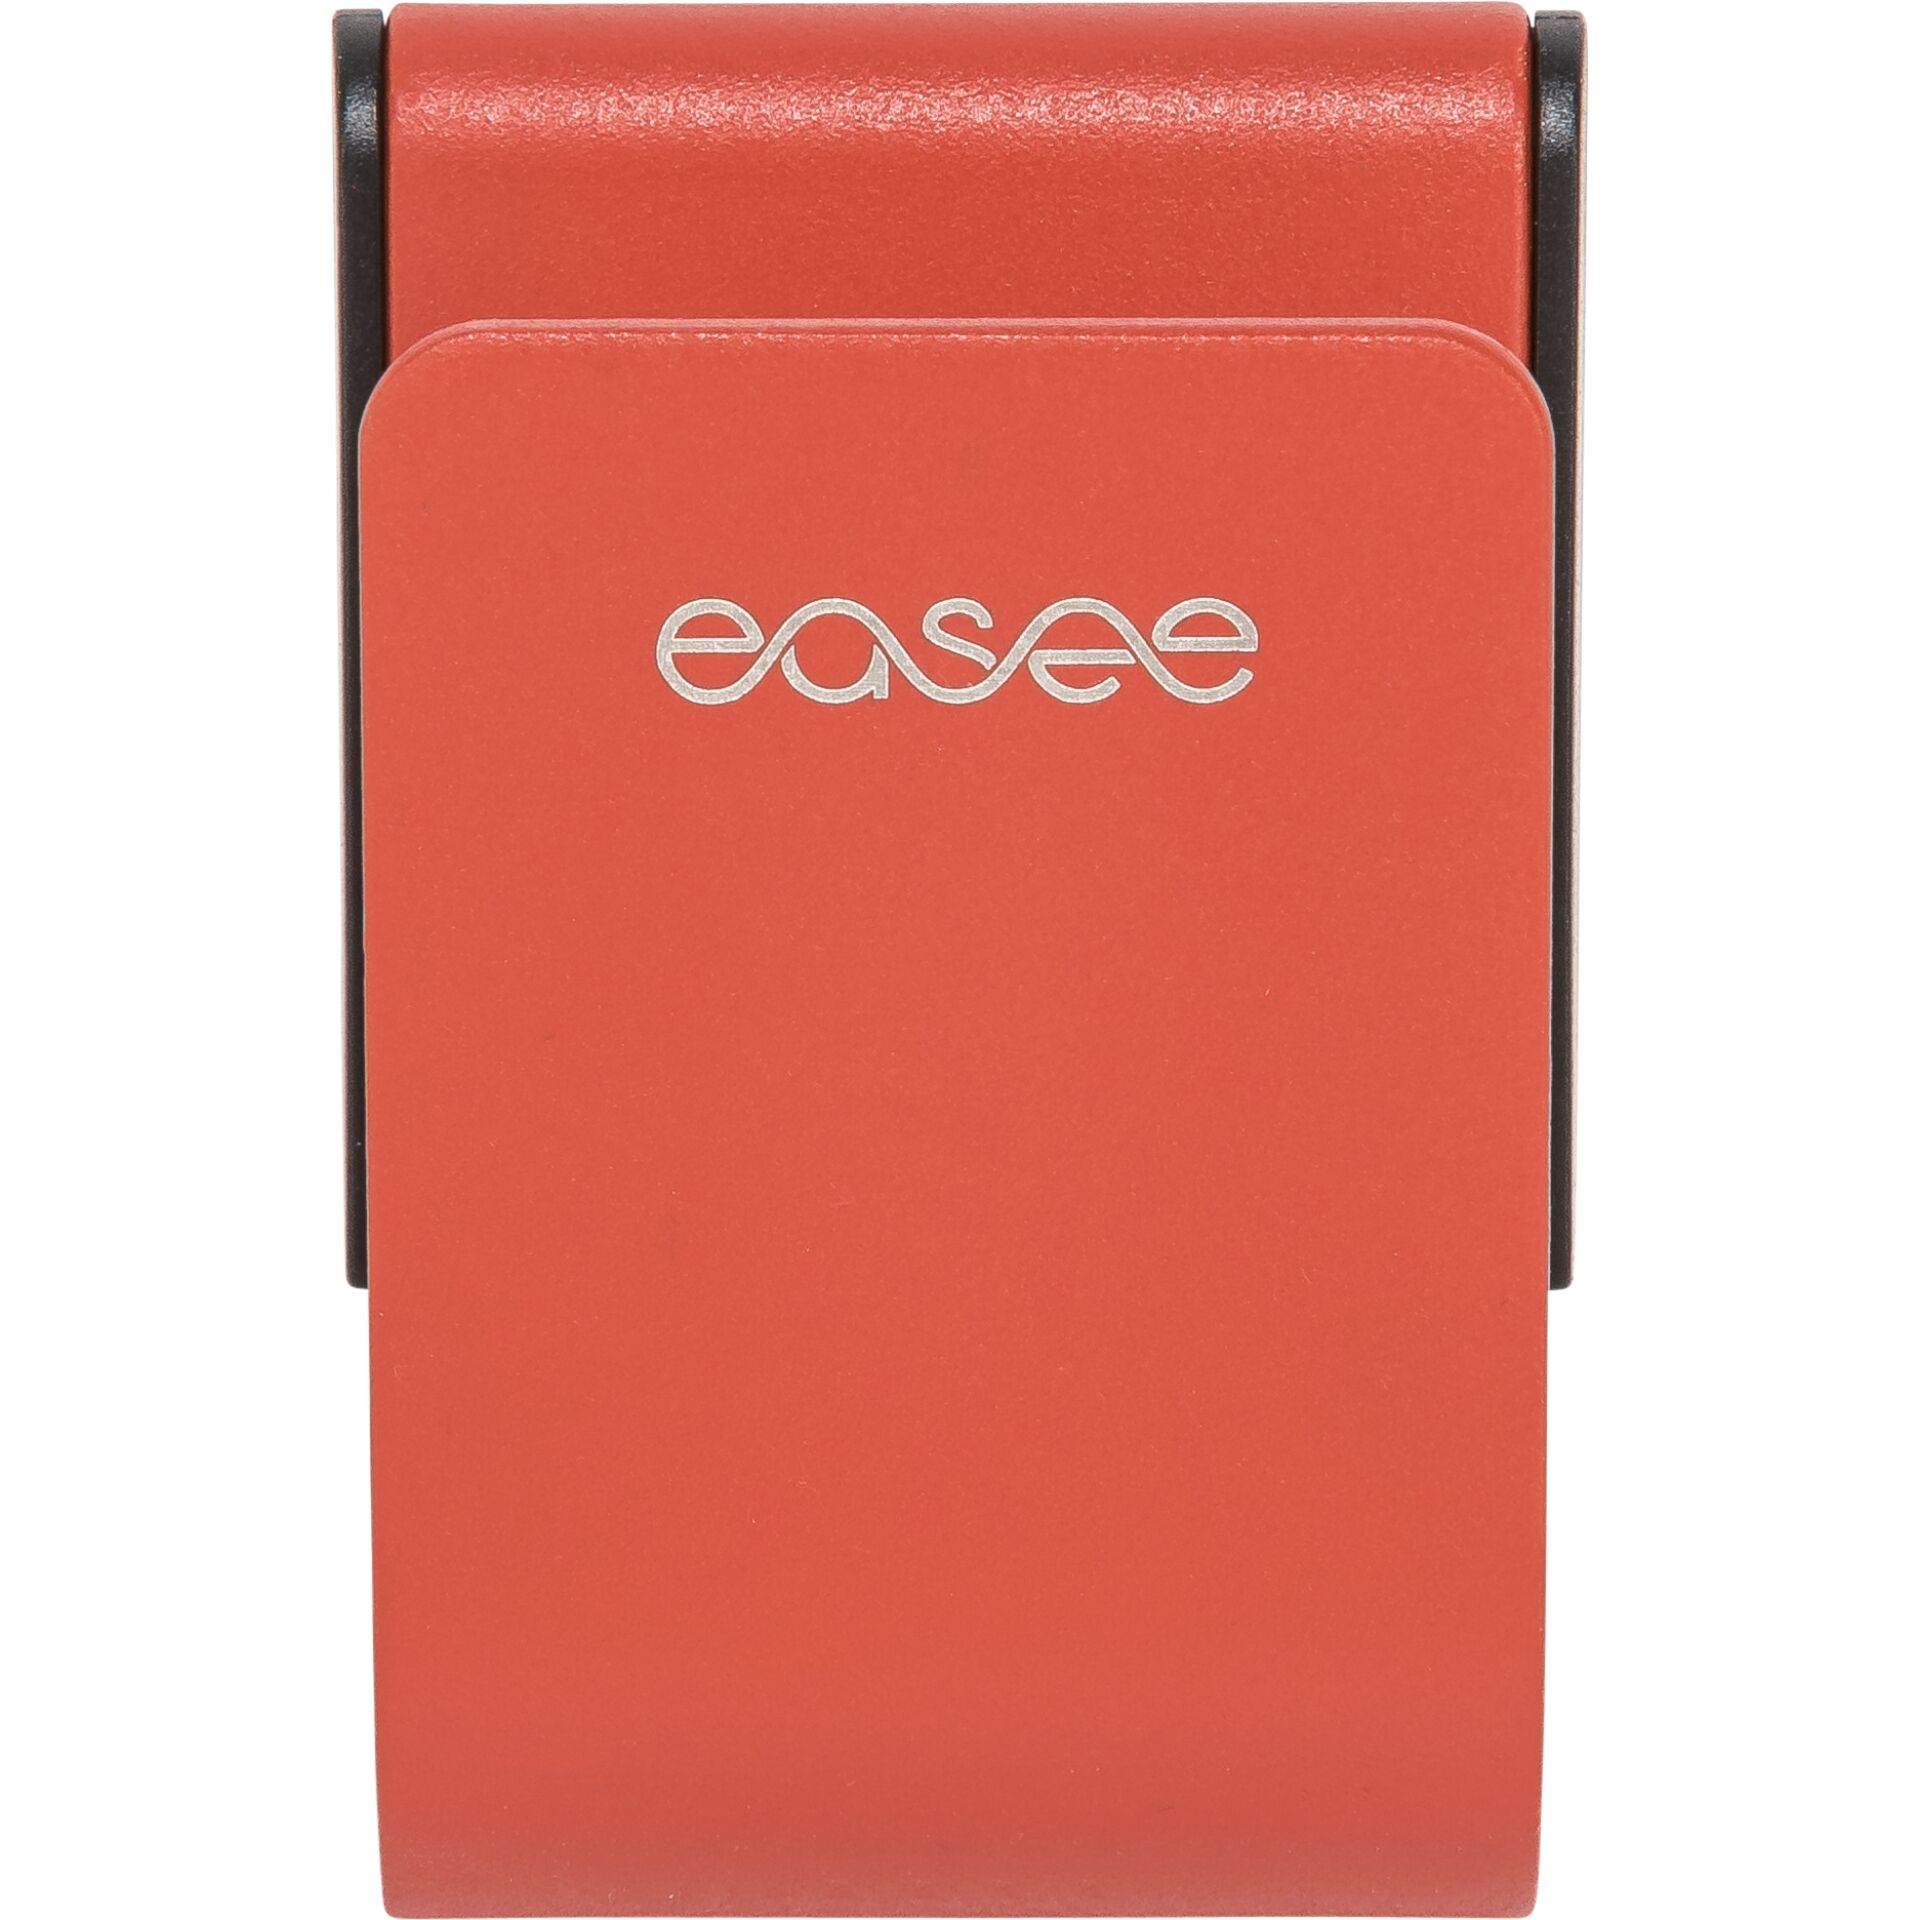 Easee U-Hook supporto rosso